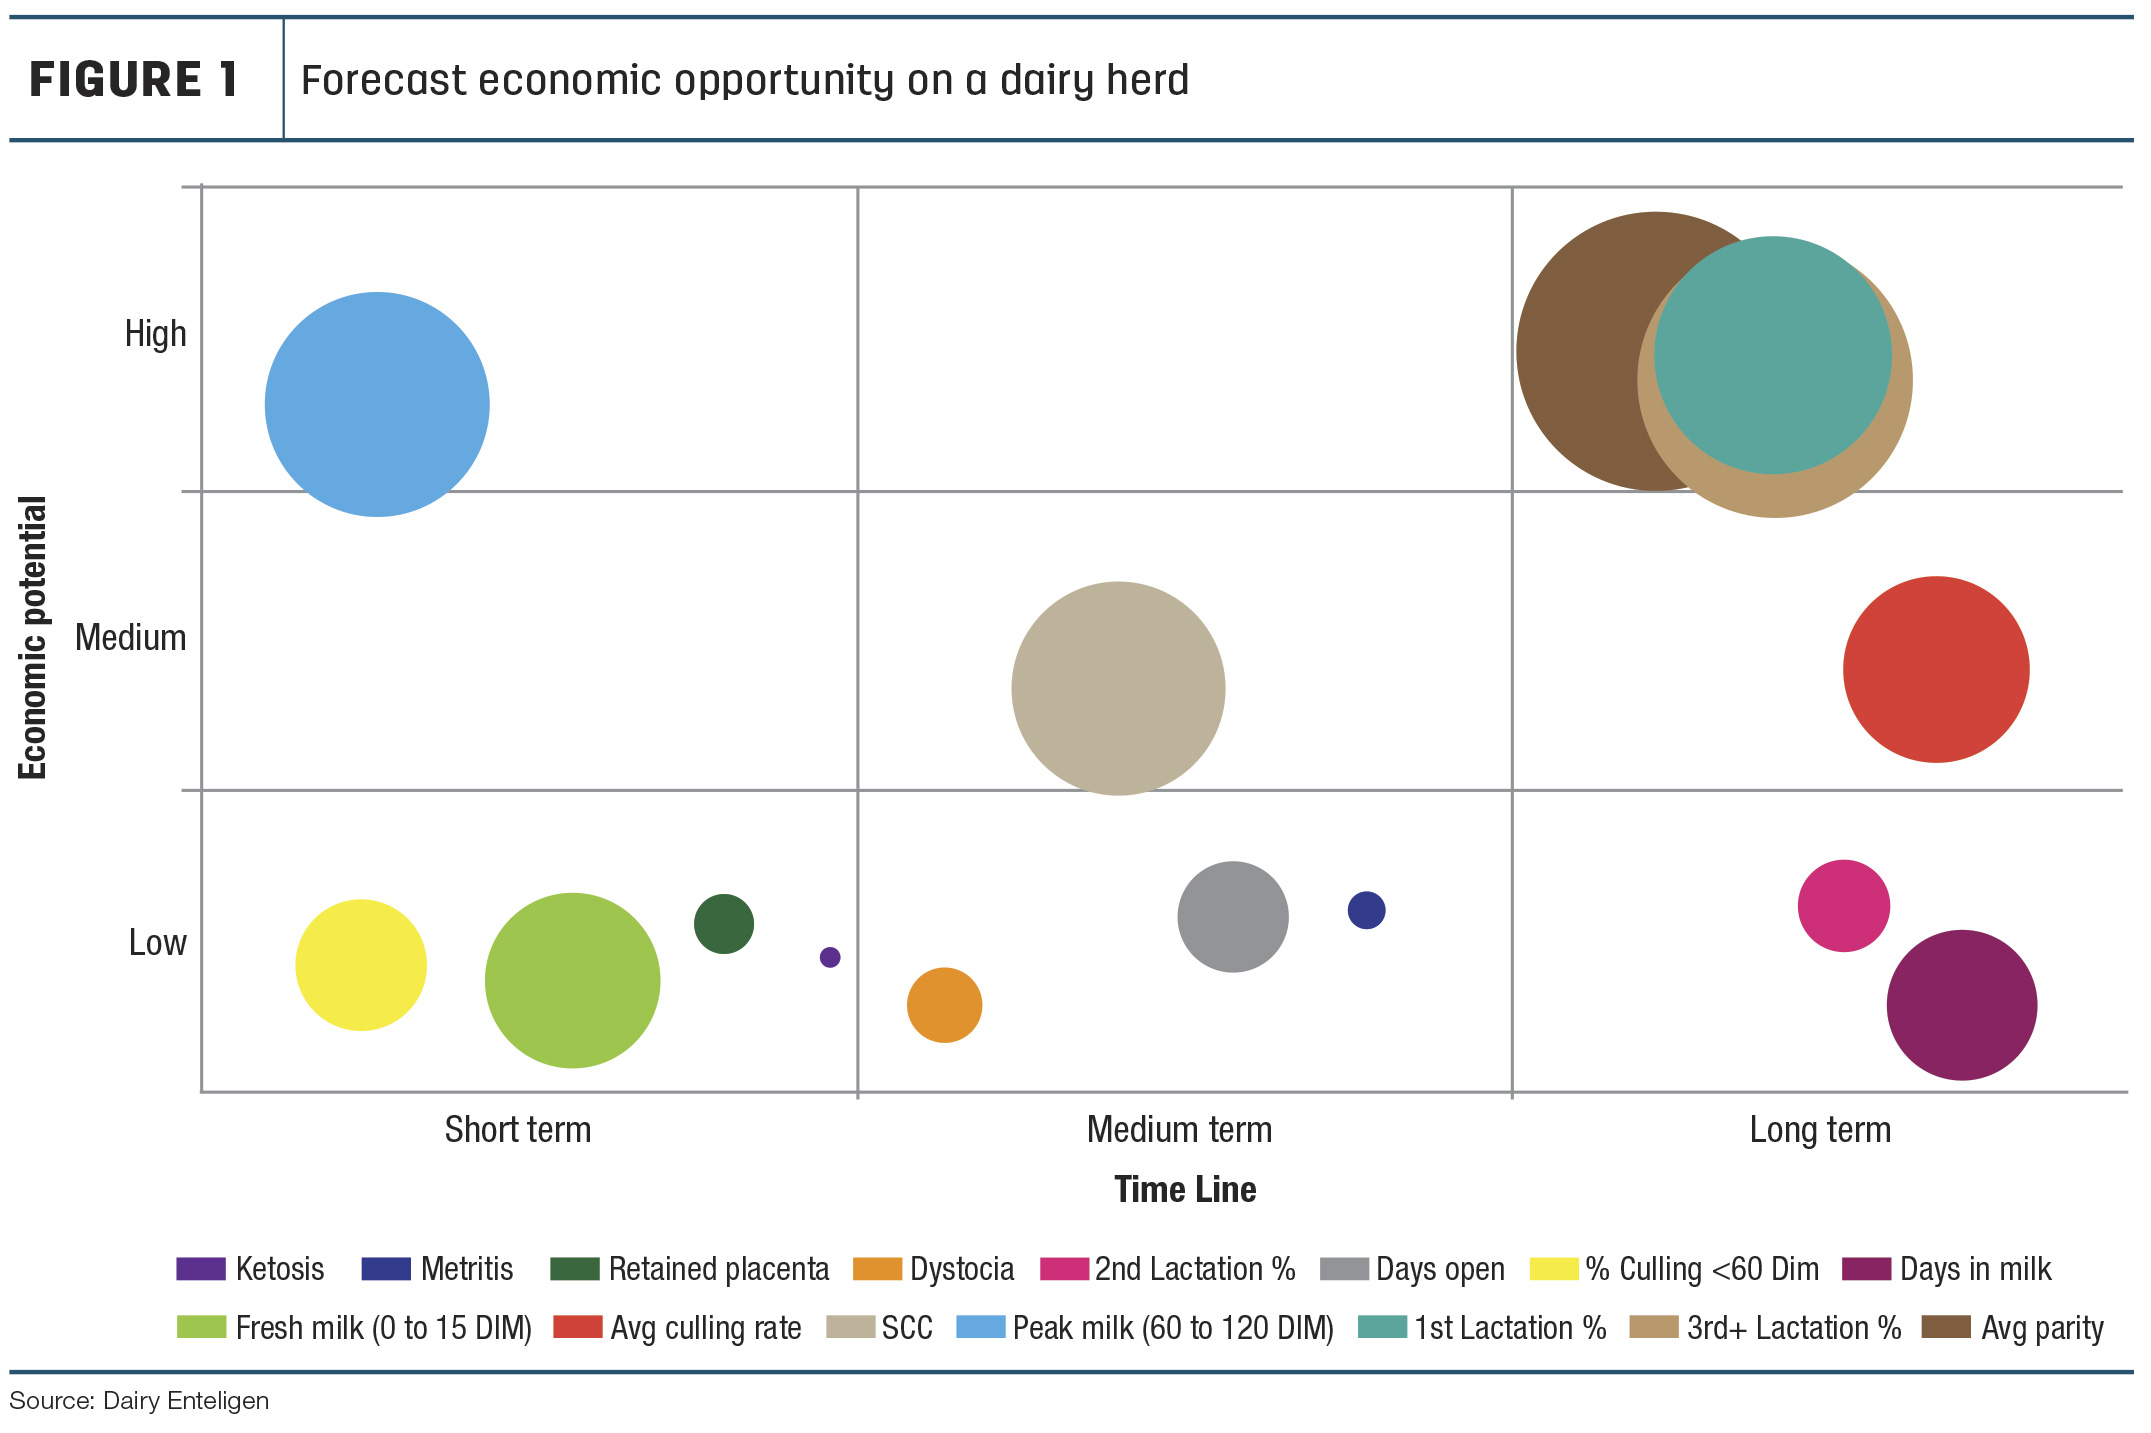 Forecast economic opportunity on a dairy herd